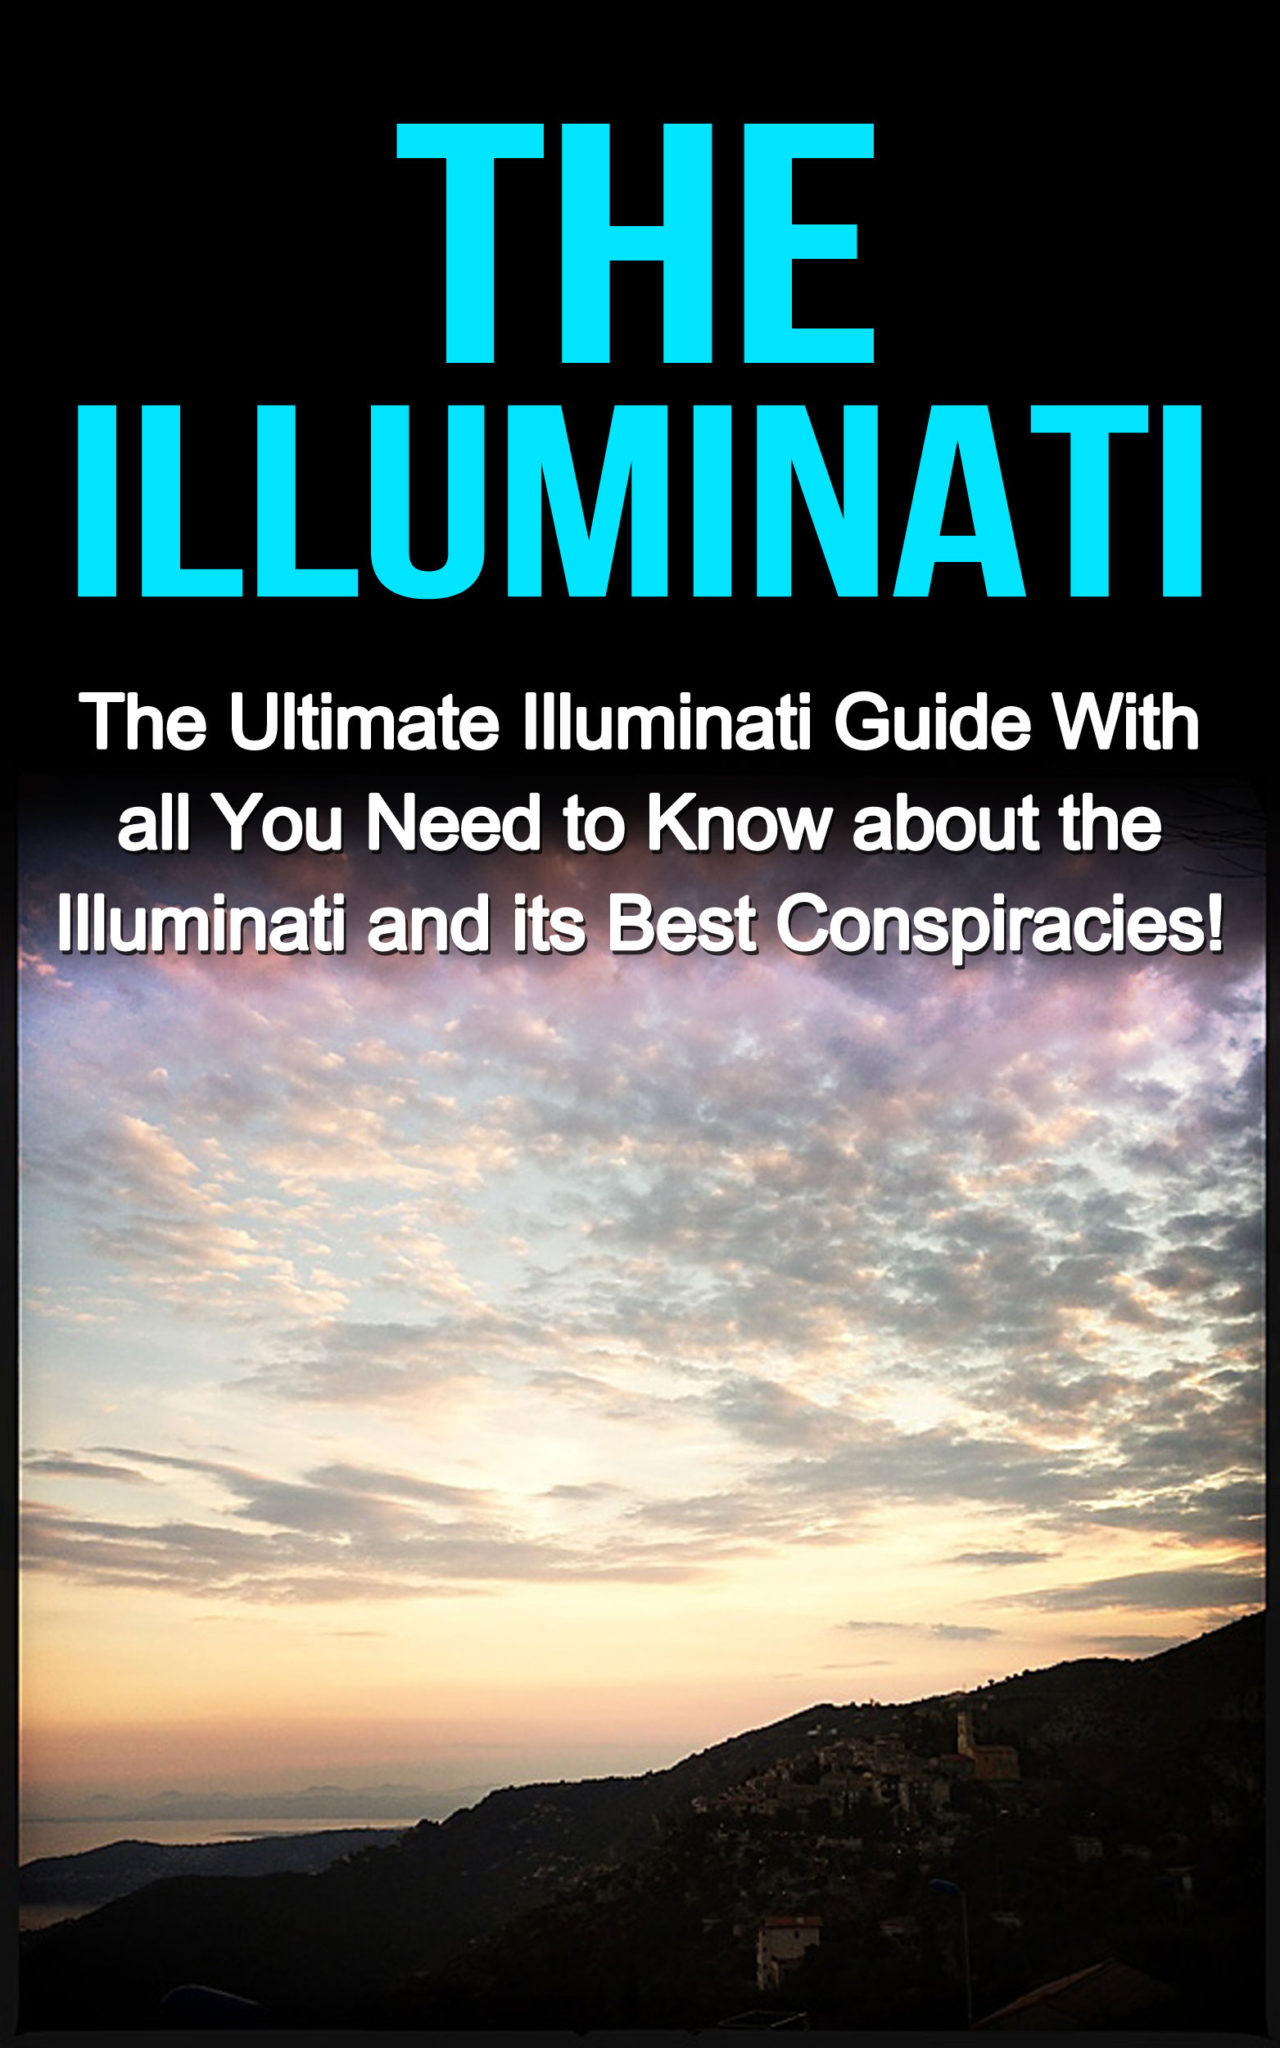 FREE: The Illuminati: The Ultimate Illuminati Guide With All You Need to Know About the Illuminati and Its Best Conspiracies! by Jack Porter